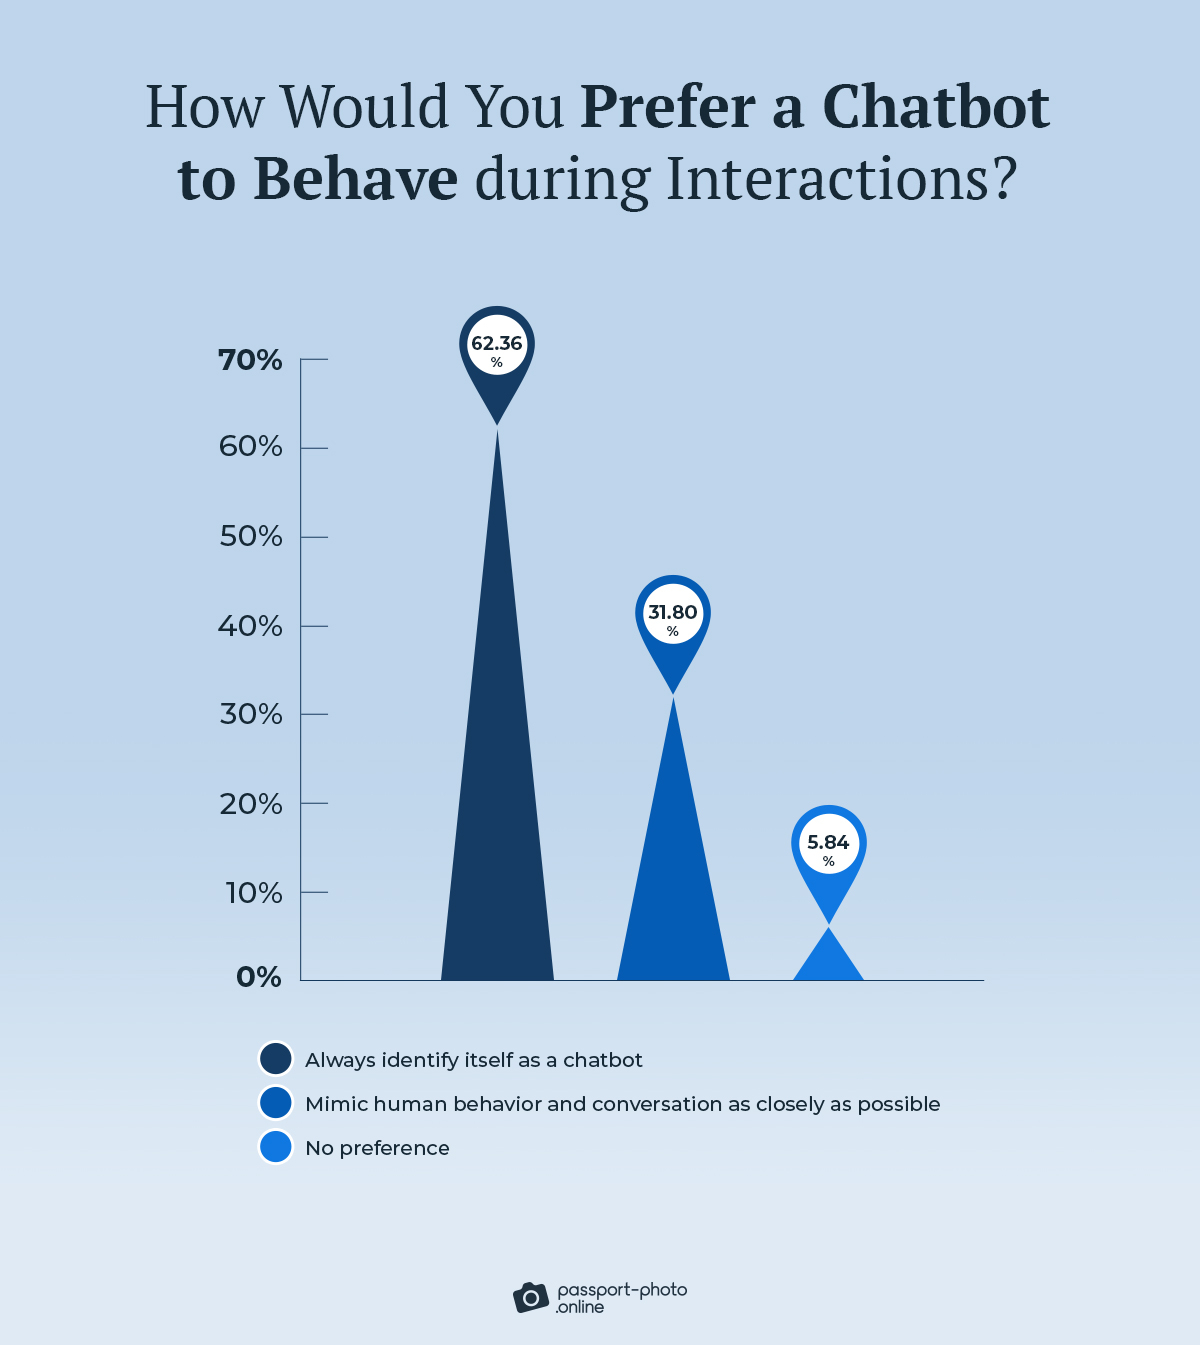 How would you prefer a chatbot to behave during interactions?